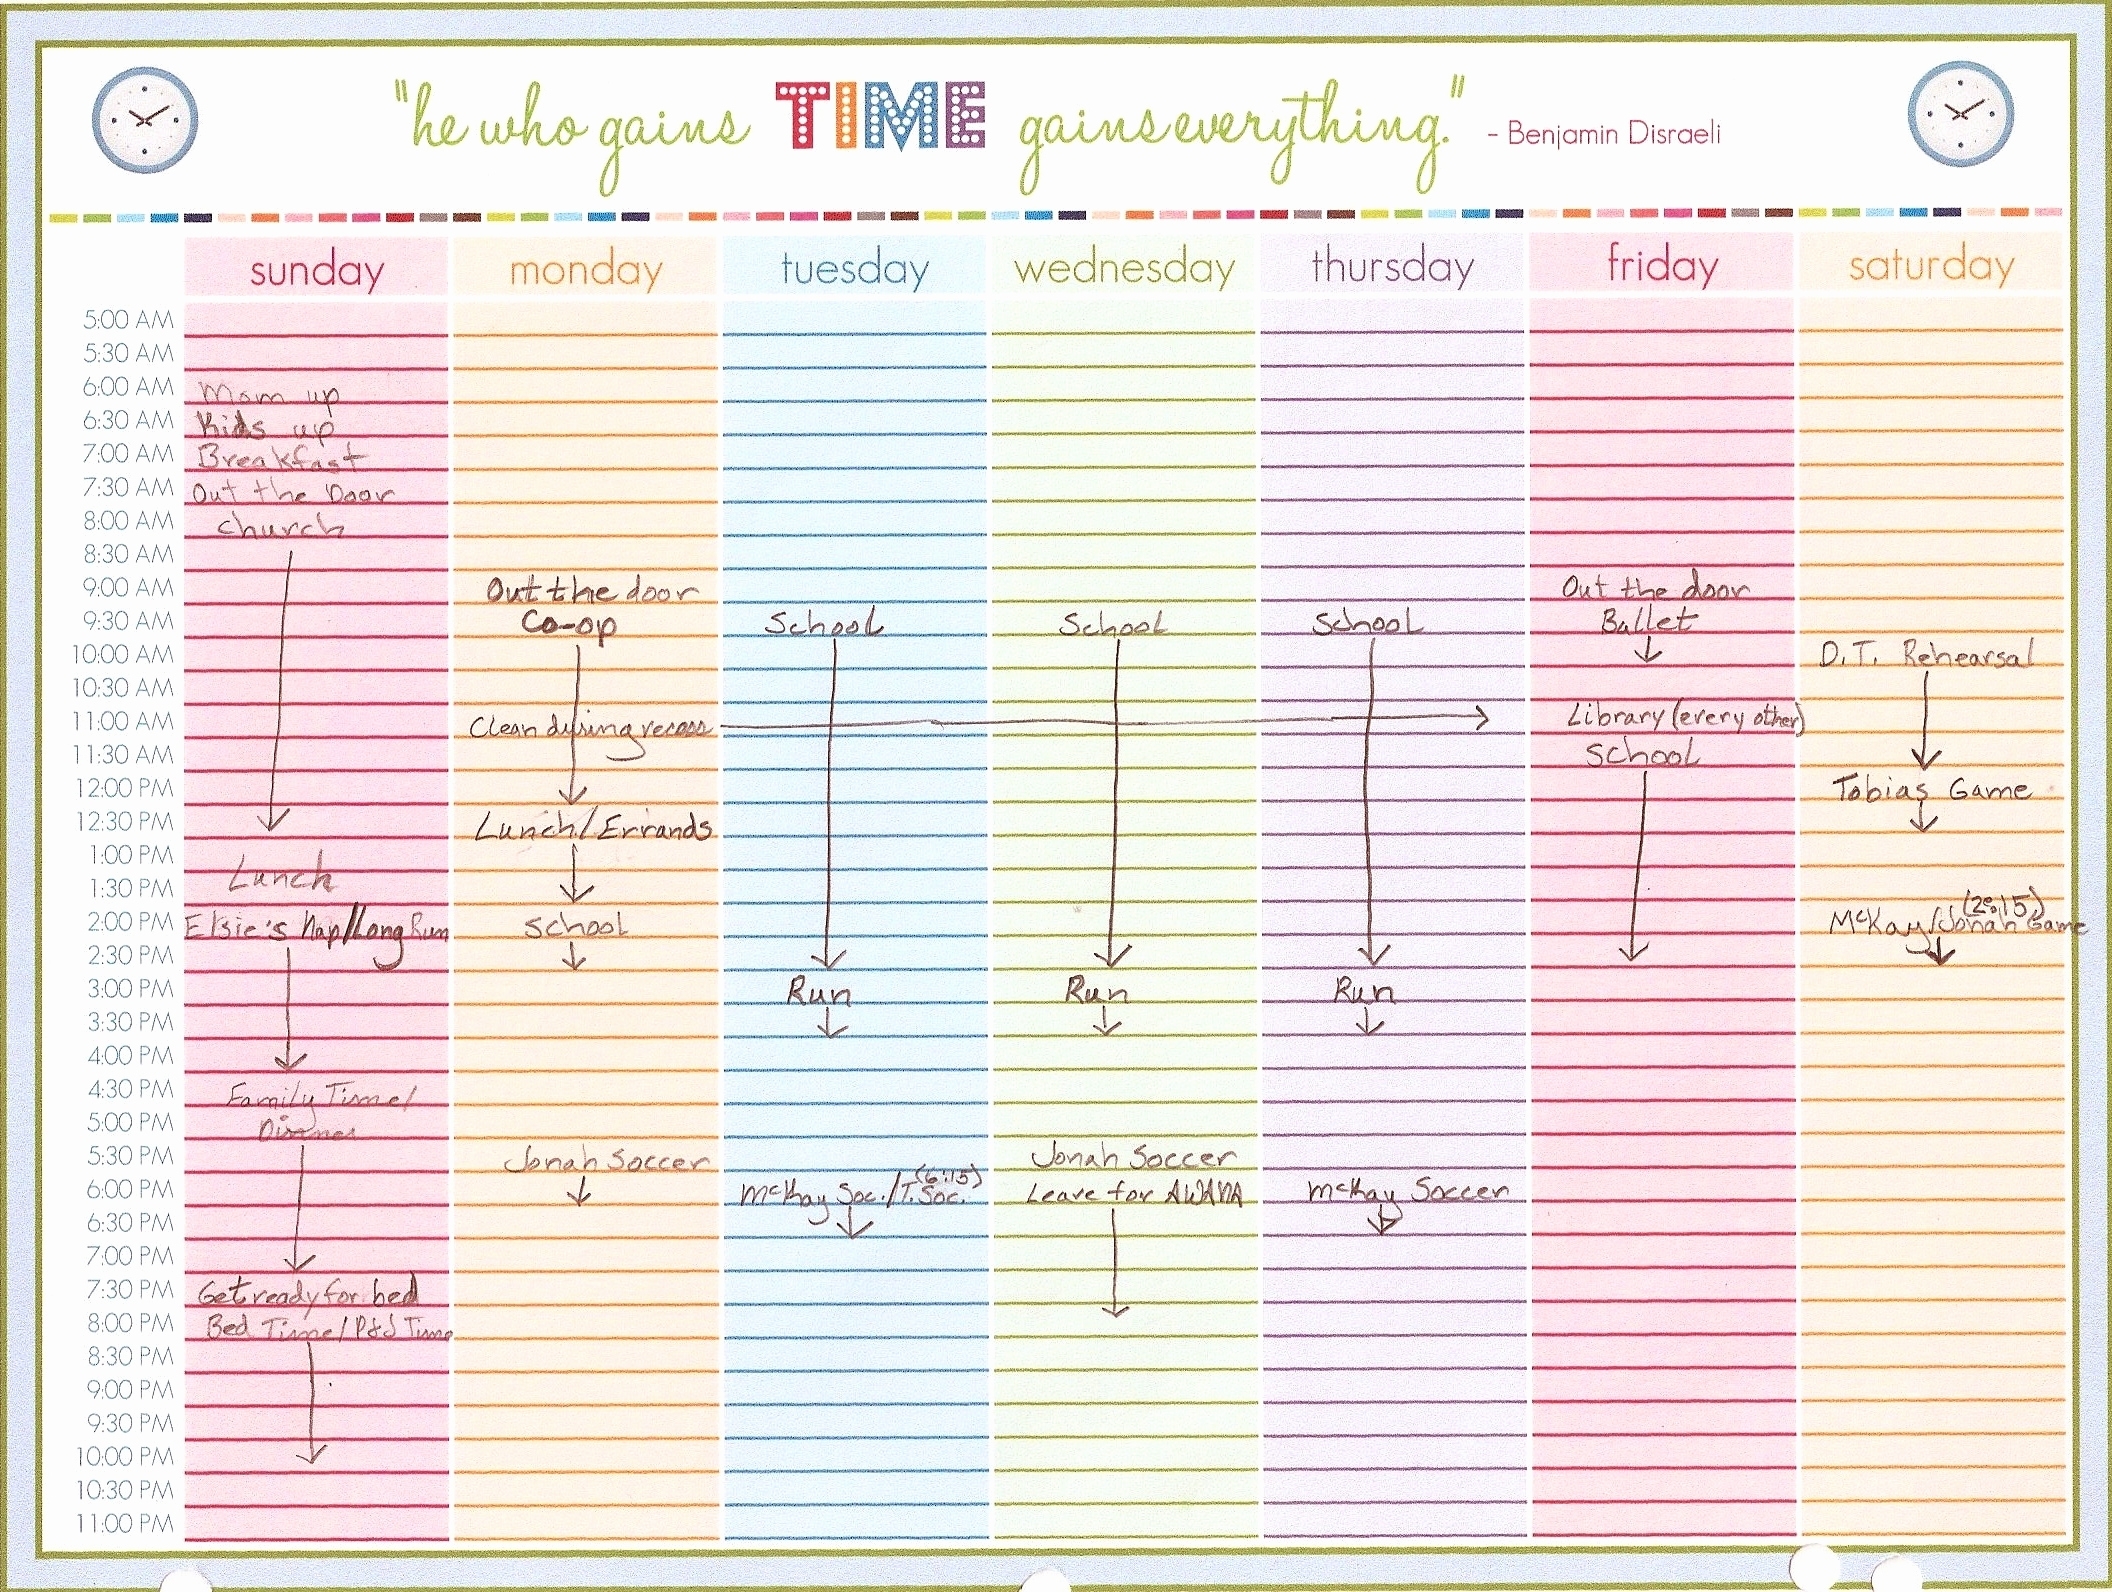 Awesome 23 Illustration Weekly Calendar Printable Weekly Calendars throughout Weekly Planner Template With Time Slots